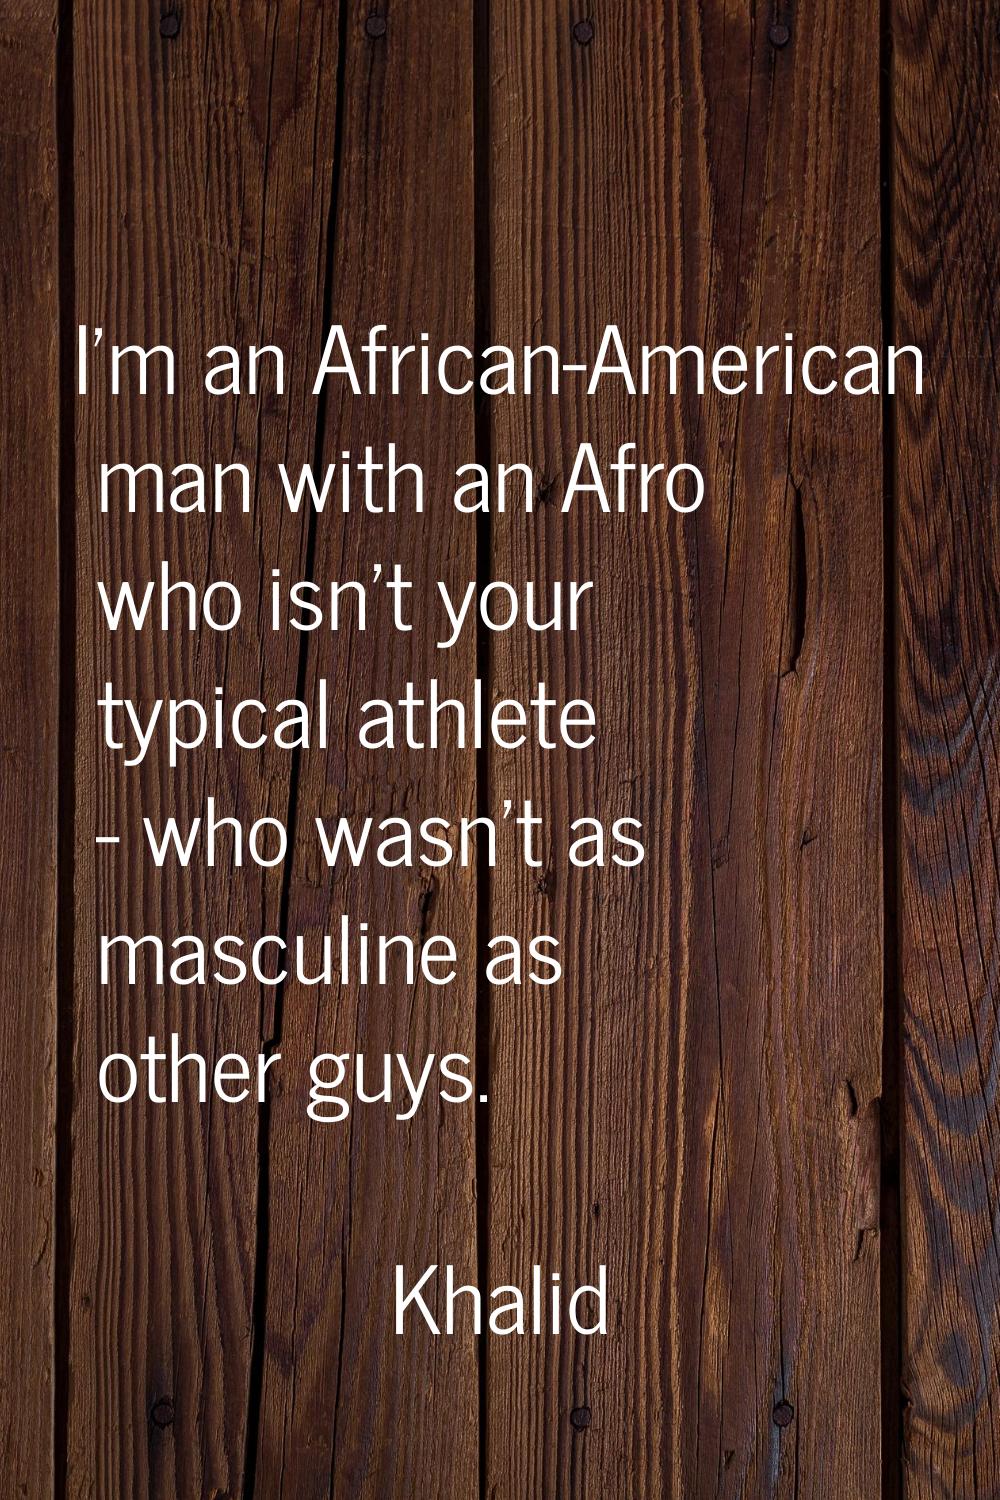 I'm an African-American man with an Afro who isn't your typical athlete - who wasn't as masculine a